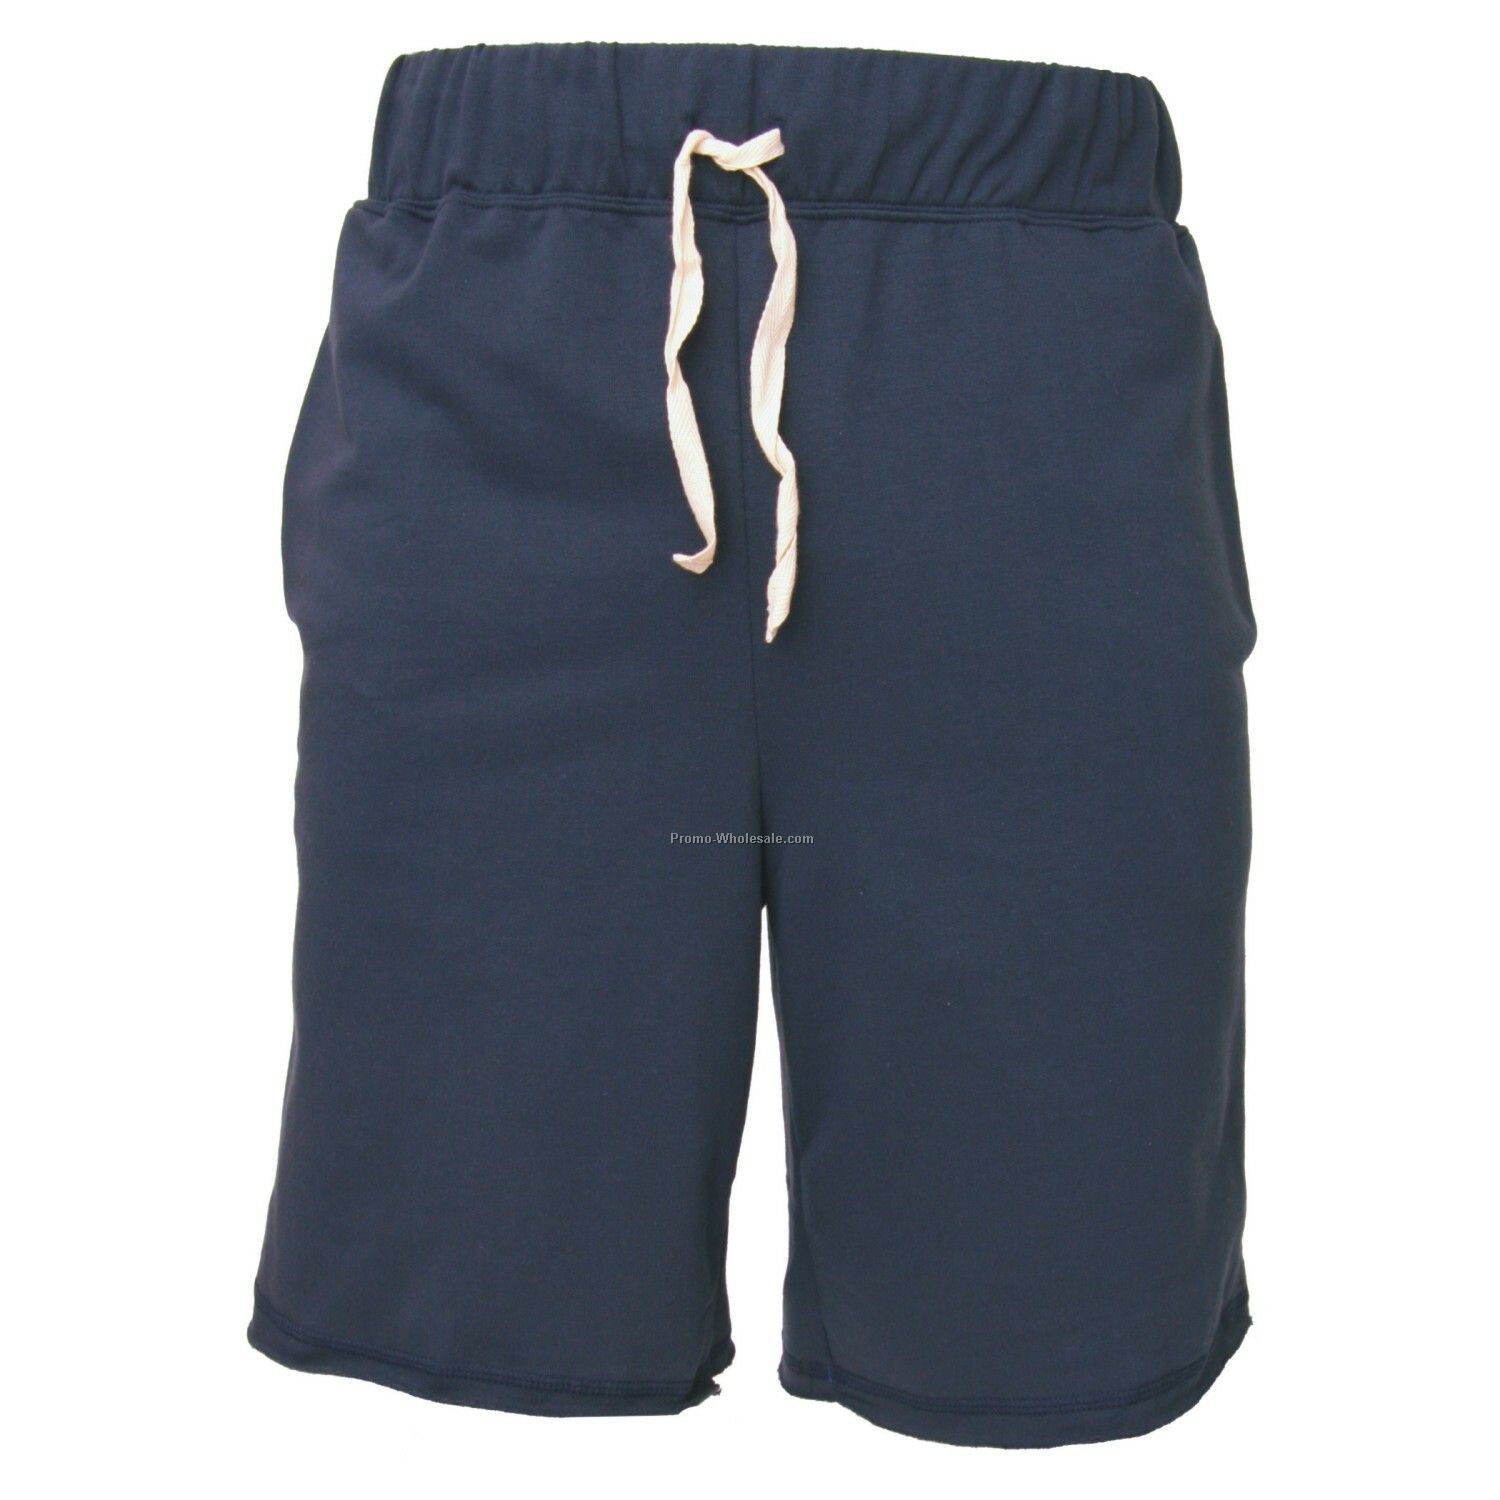 Adults' Navy Blue First Place Fleece Shorts With 2 Side Pockets (S-xl)